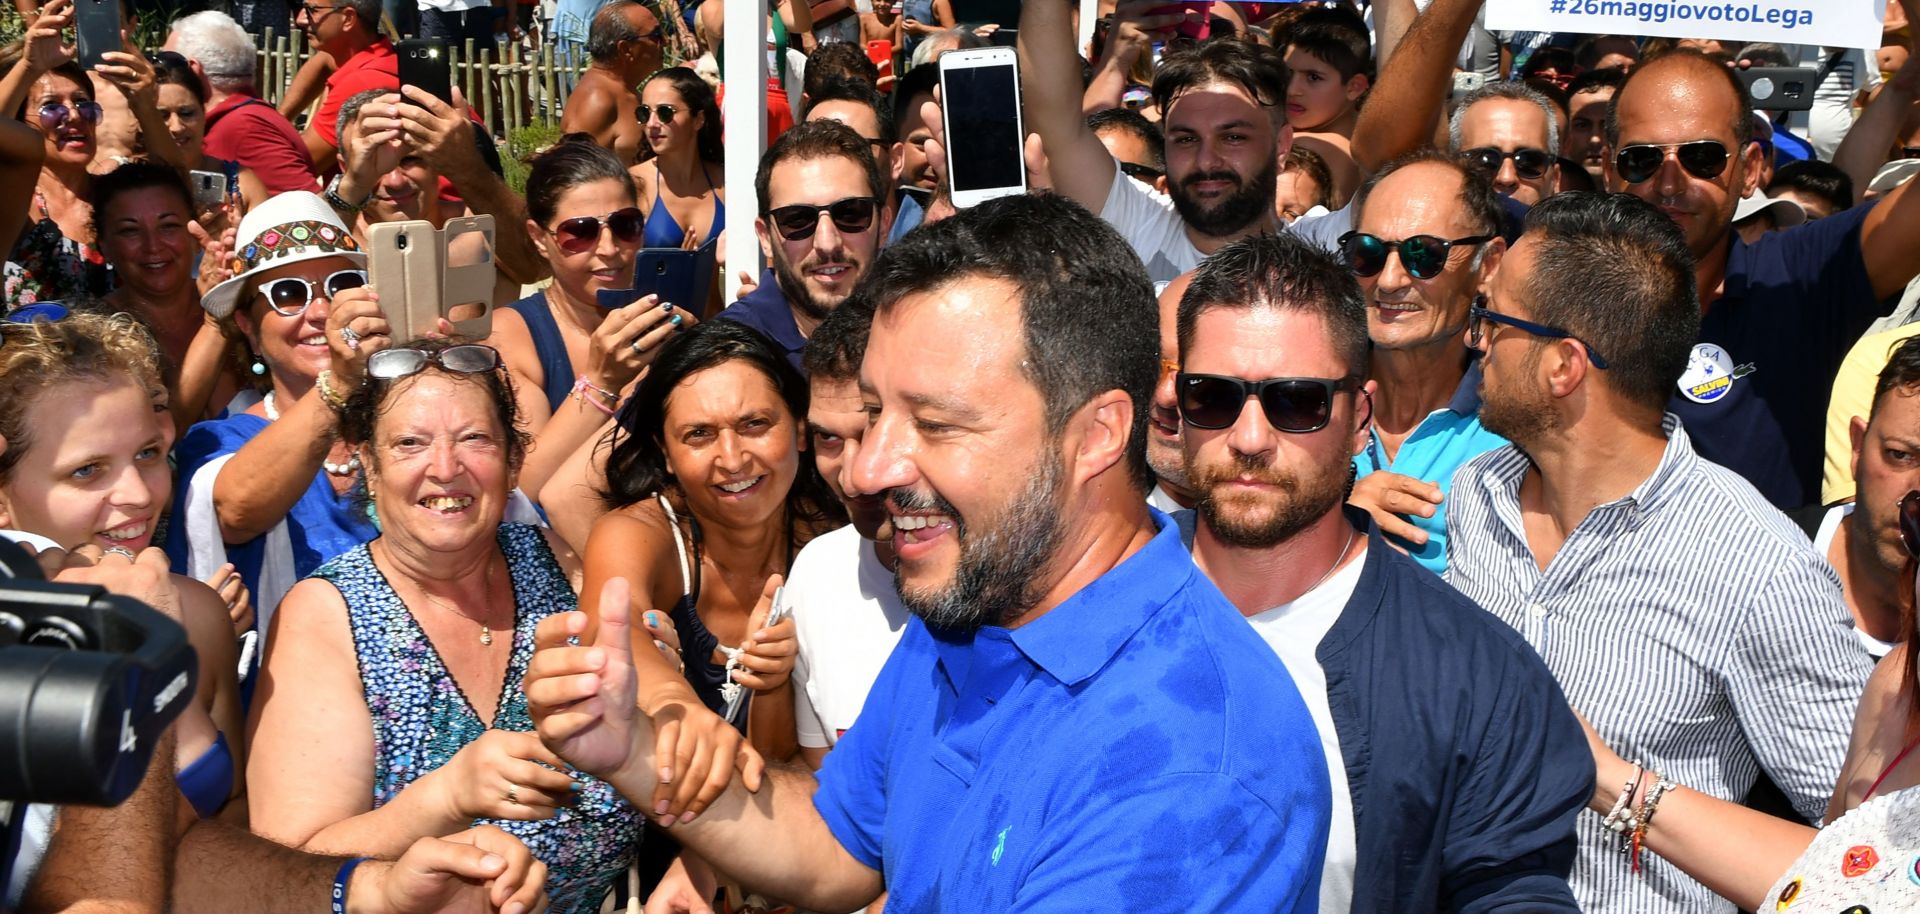 Matteo Salvini, Italy's Interior minister and deputy prime minister, greets supporters in Policoro, Italy, on Aug. 10, 2019.